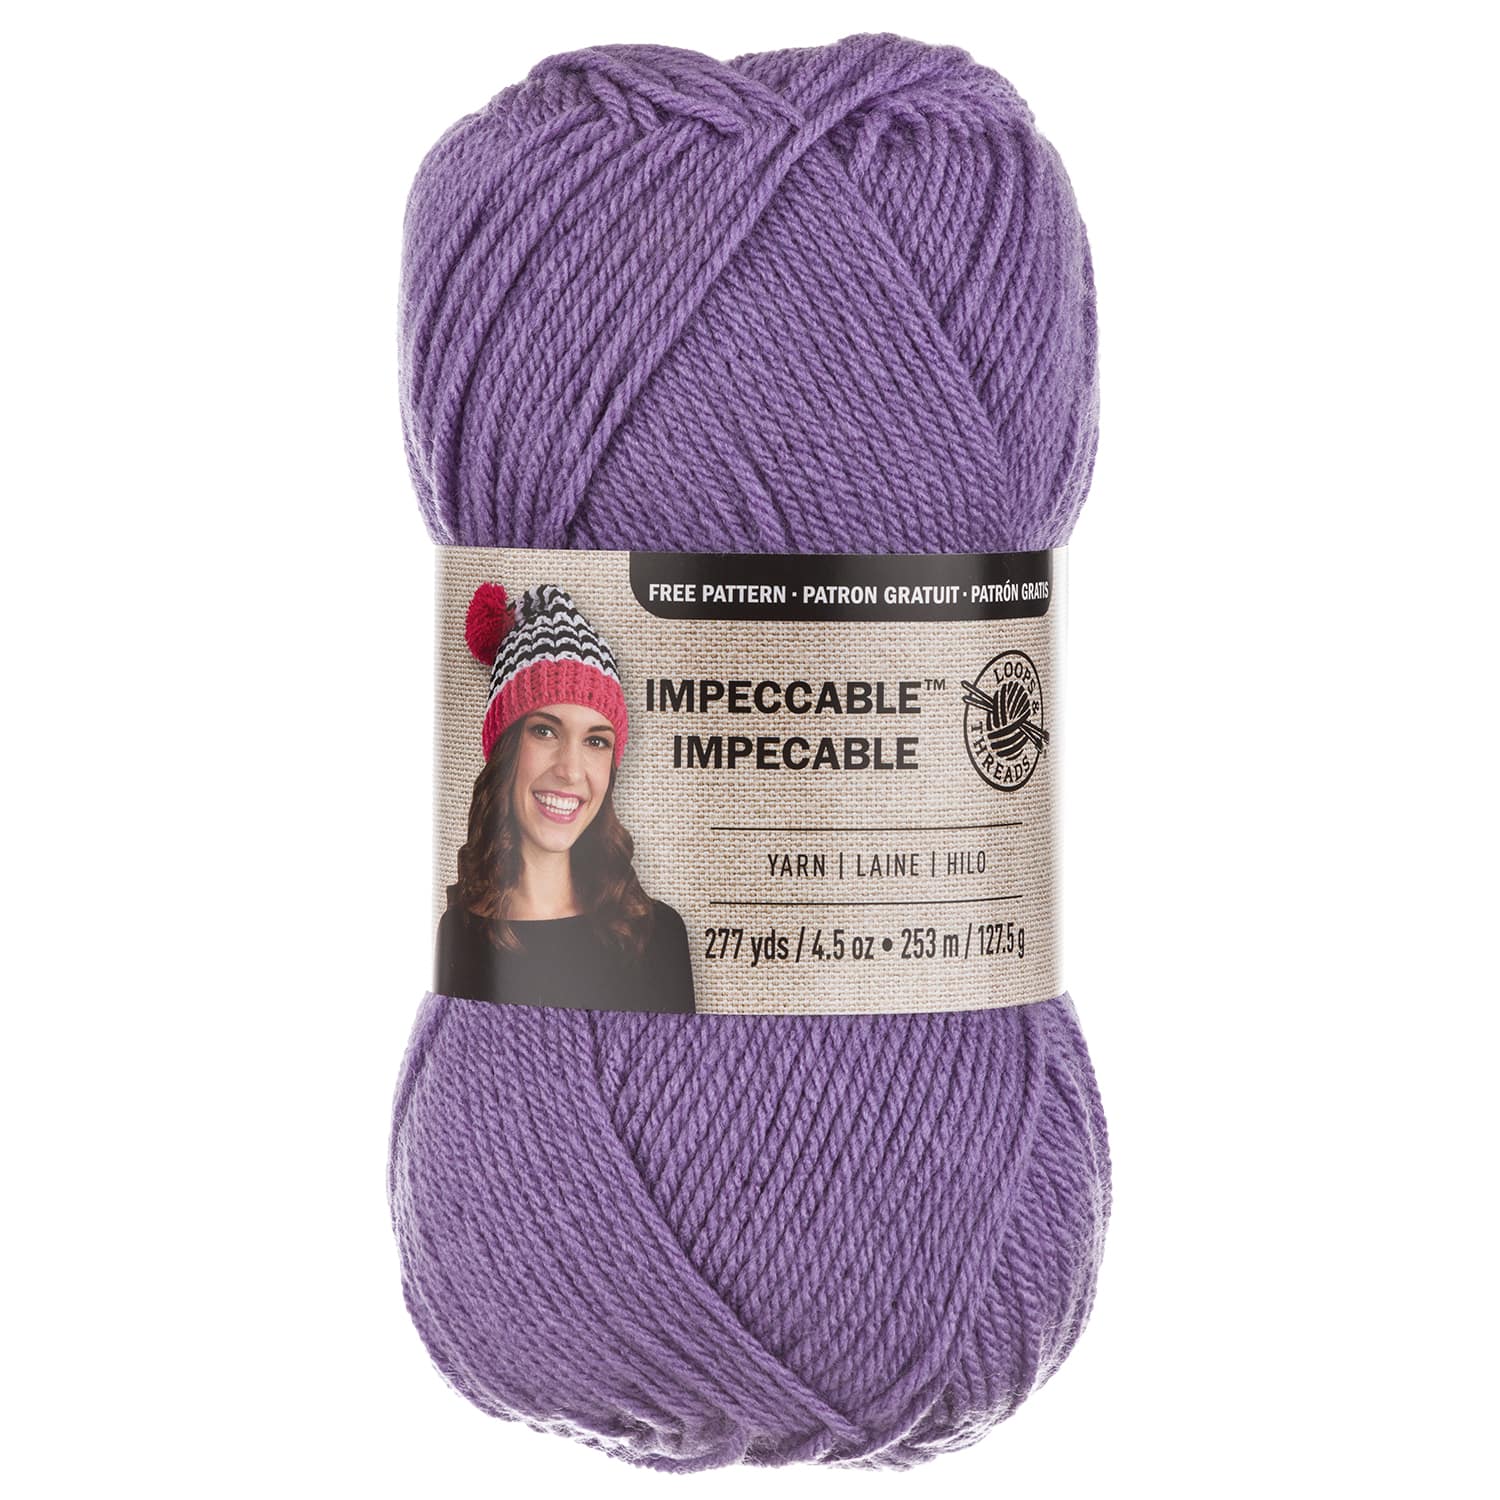 Loops & Threads Impeccable Yarn 4.5 oz Kelly Green (3-pack)